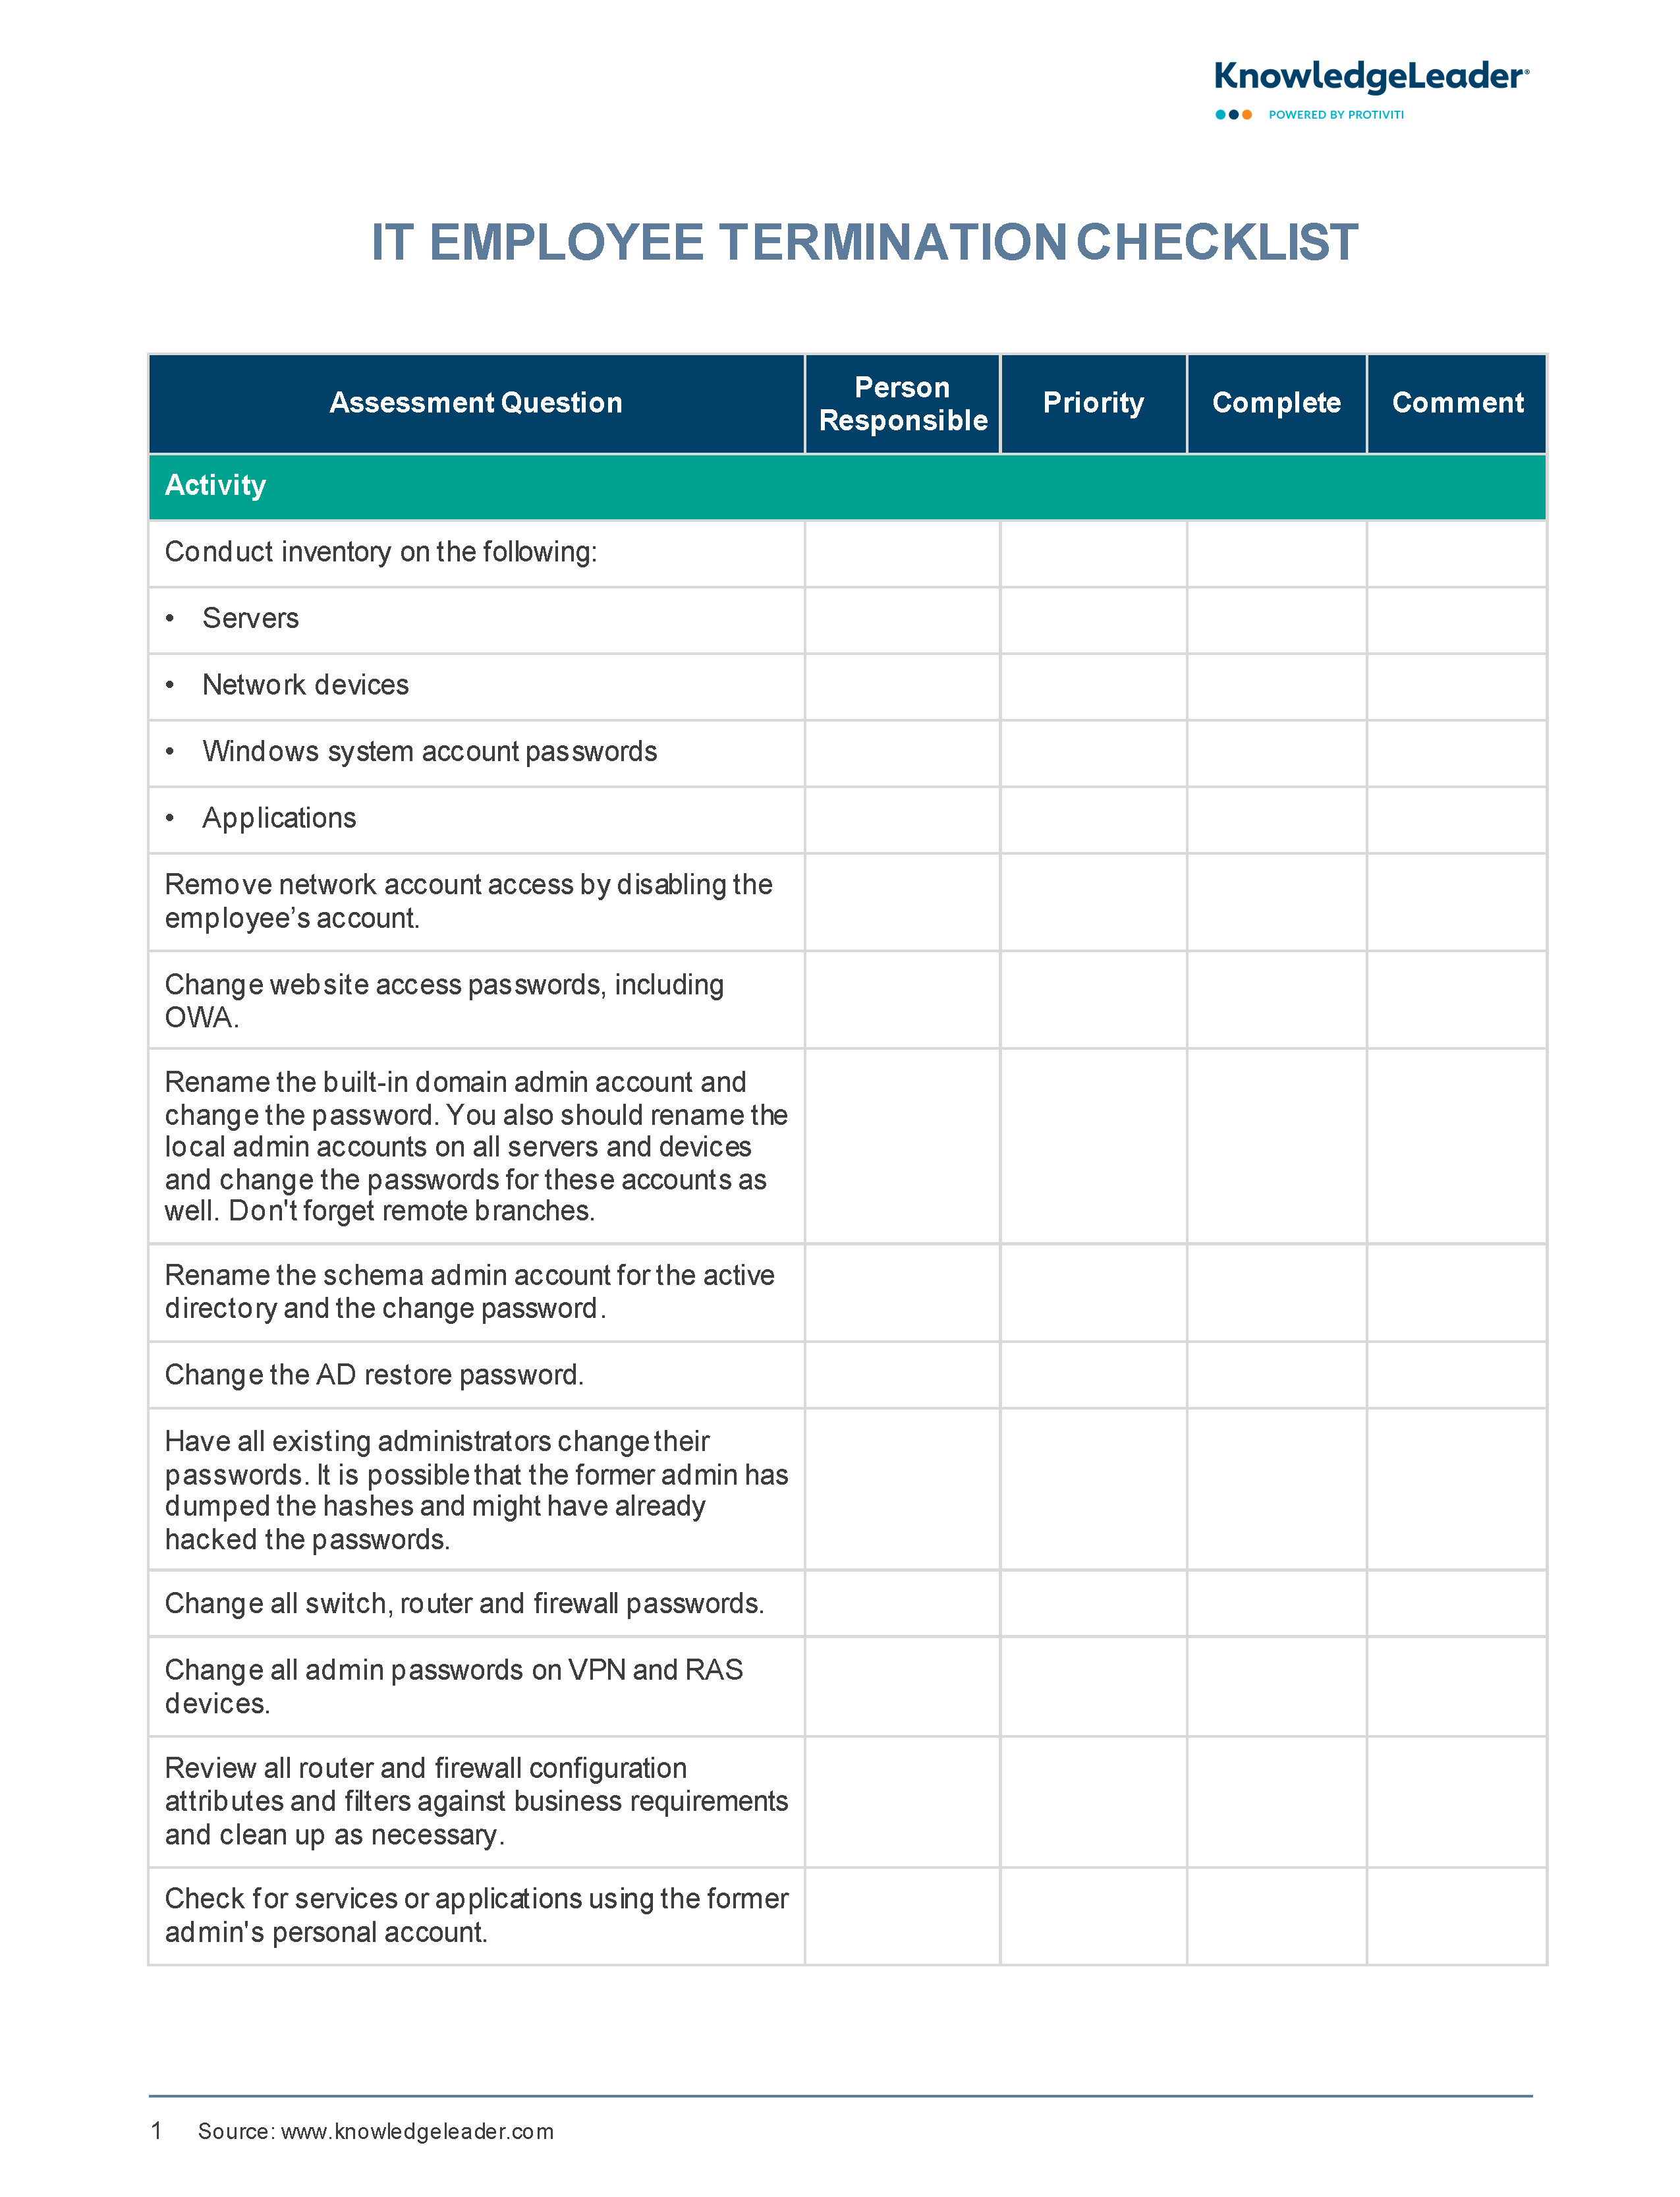 Screenshot of the first page of IT Employee Termination Checklist